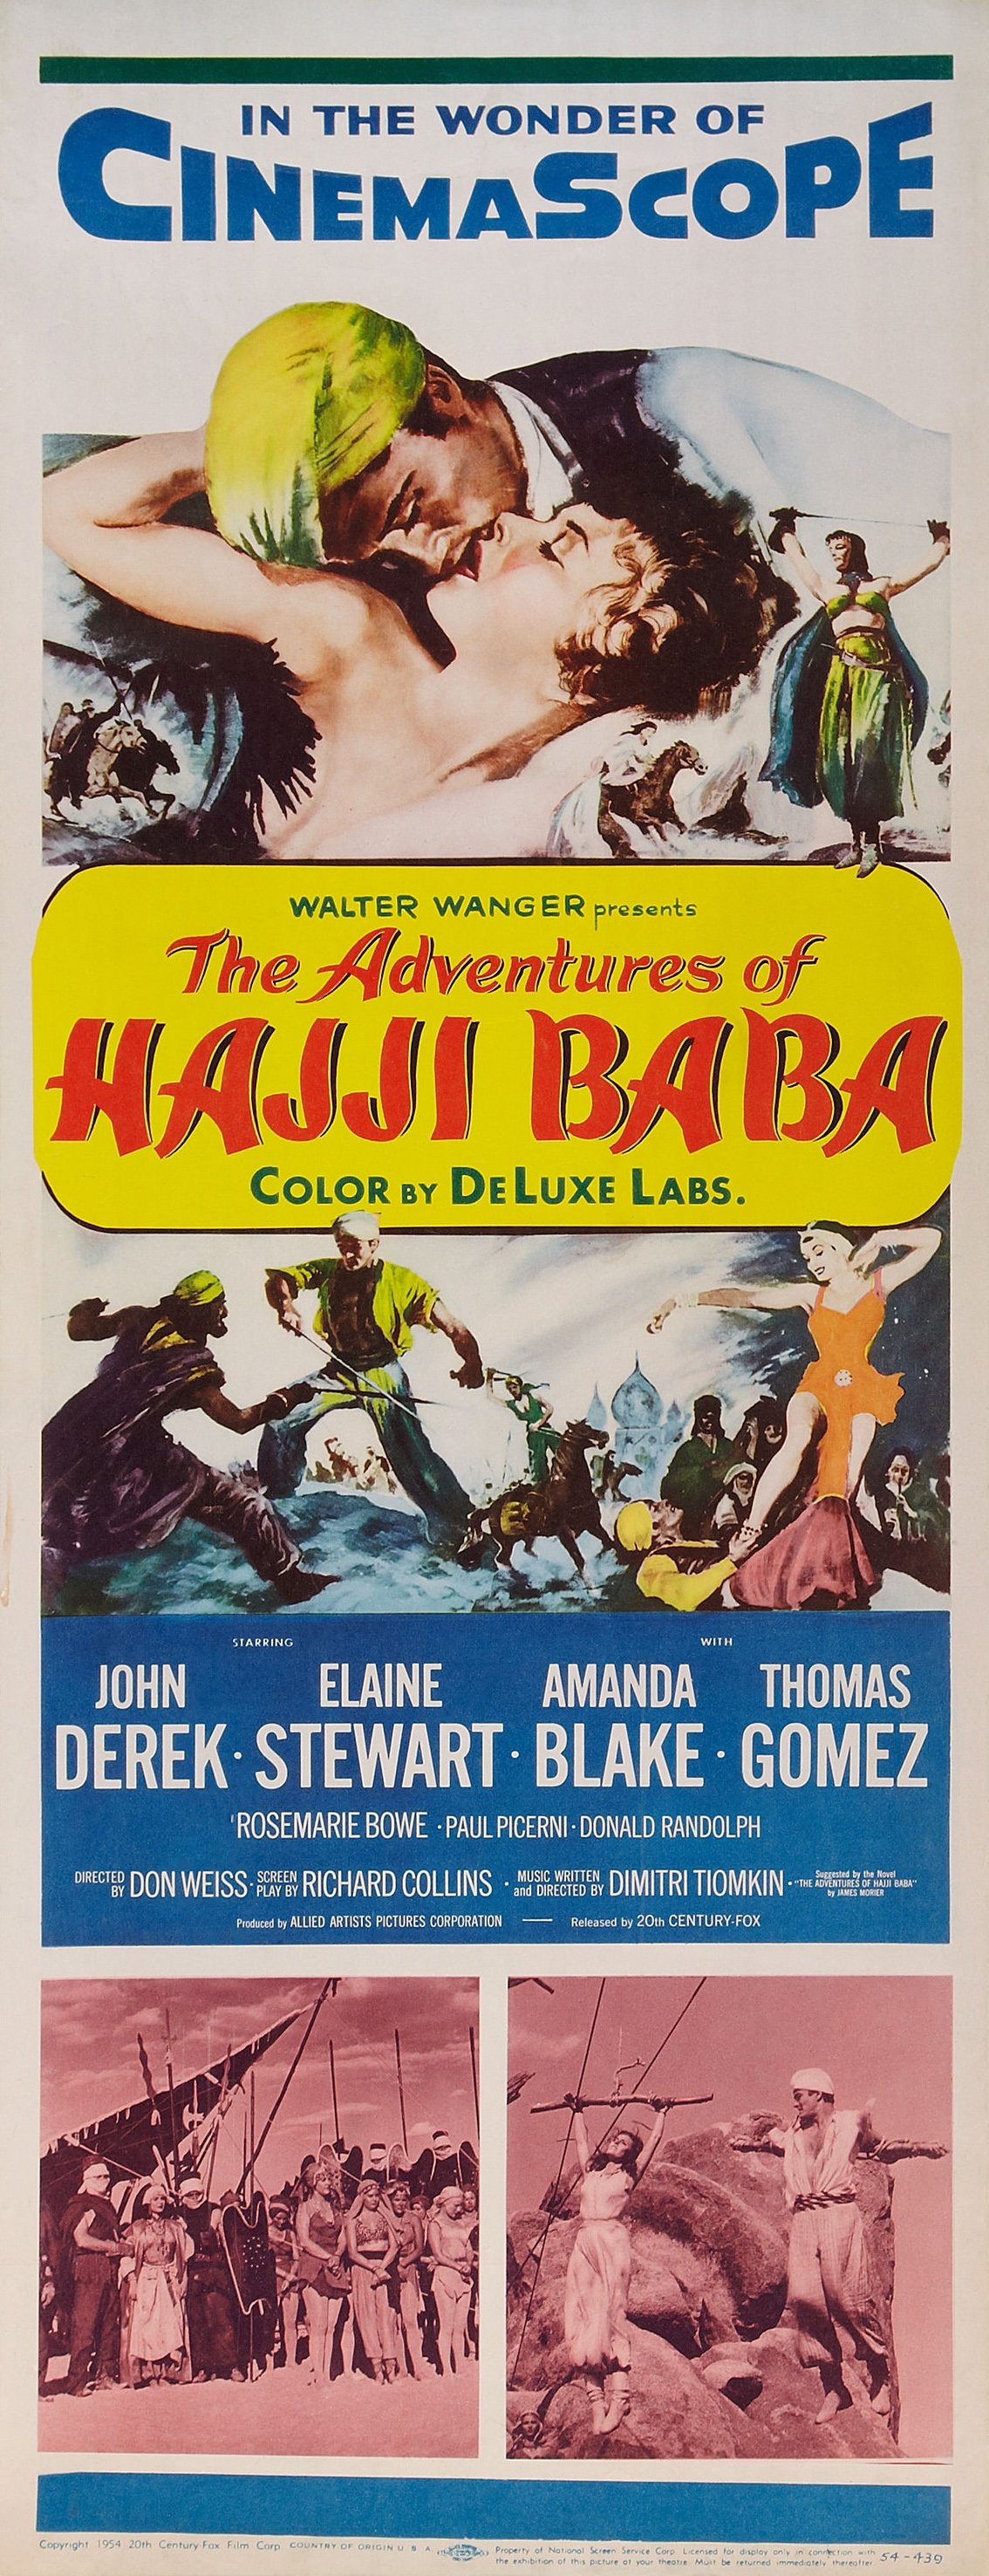 The Adventures of Hajji Baba Movie Poster